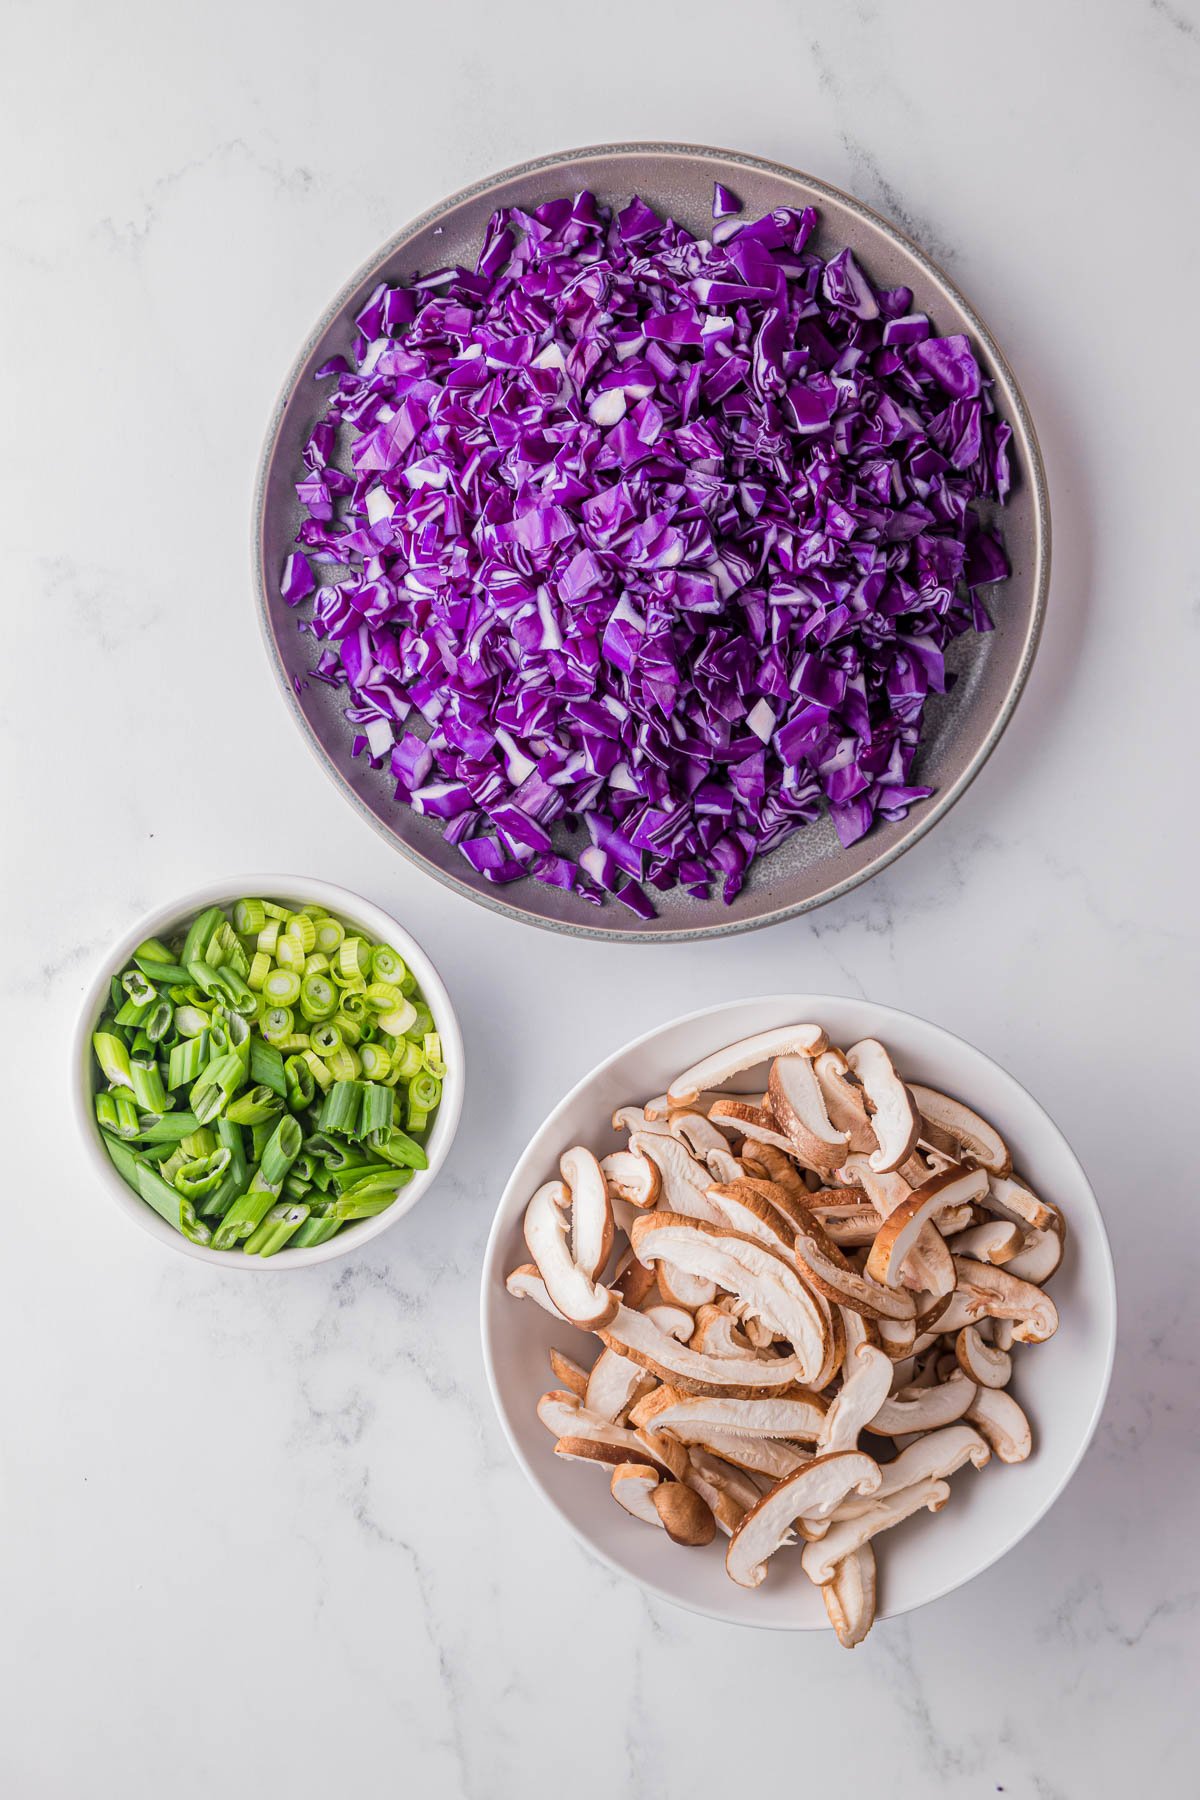 chopped purple cabbage, green onions, and mushrooms.